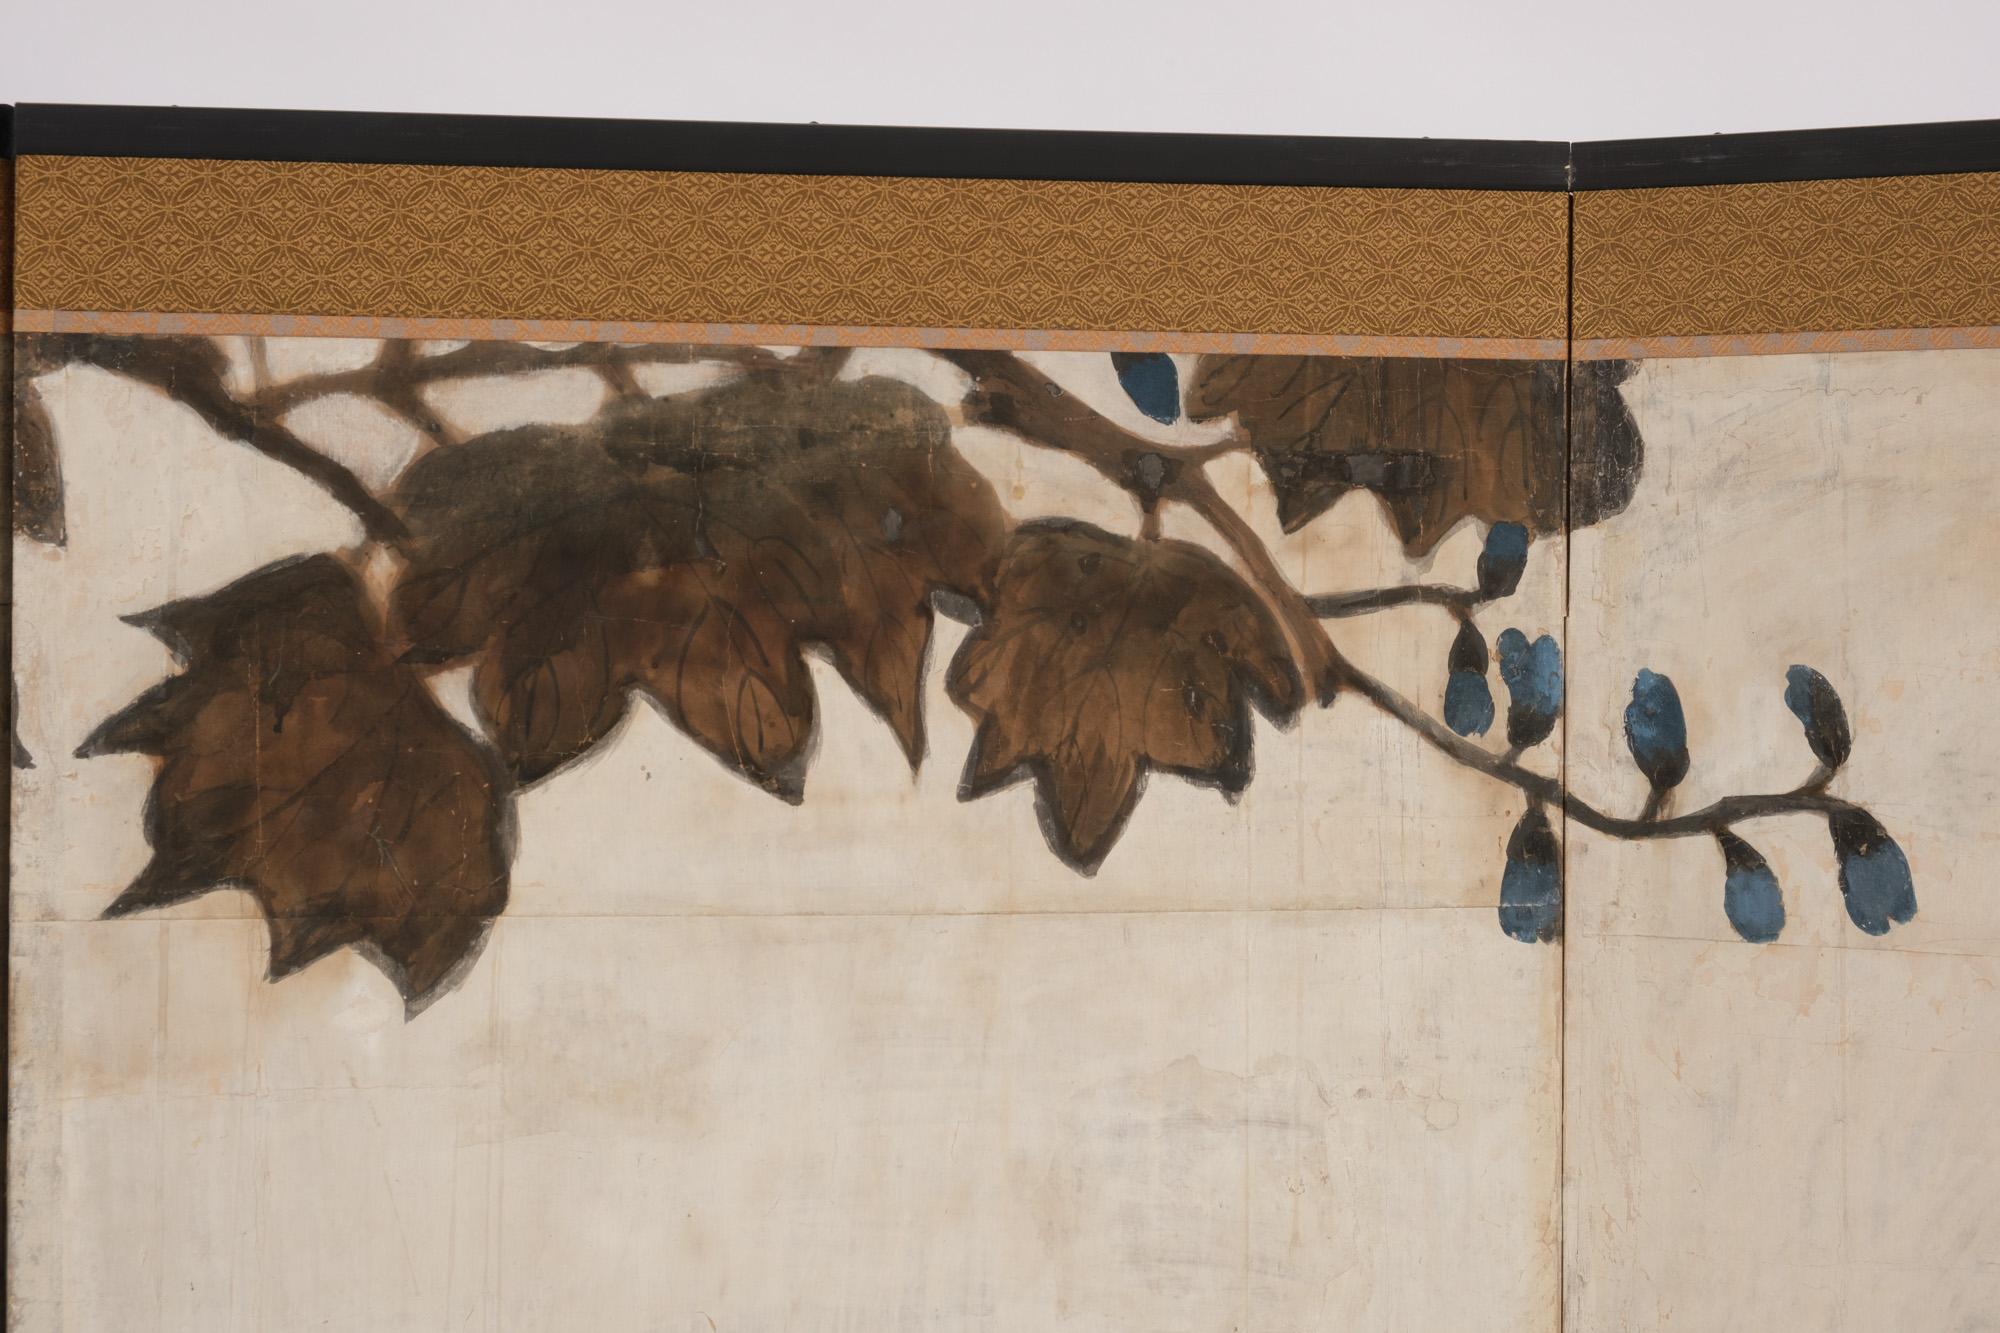 Japanese screen with a painting of an large elephant & monkey by Mori Kanson 森間村 For Sale 7